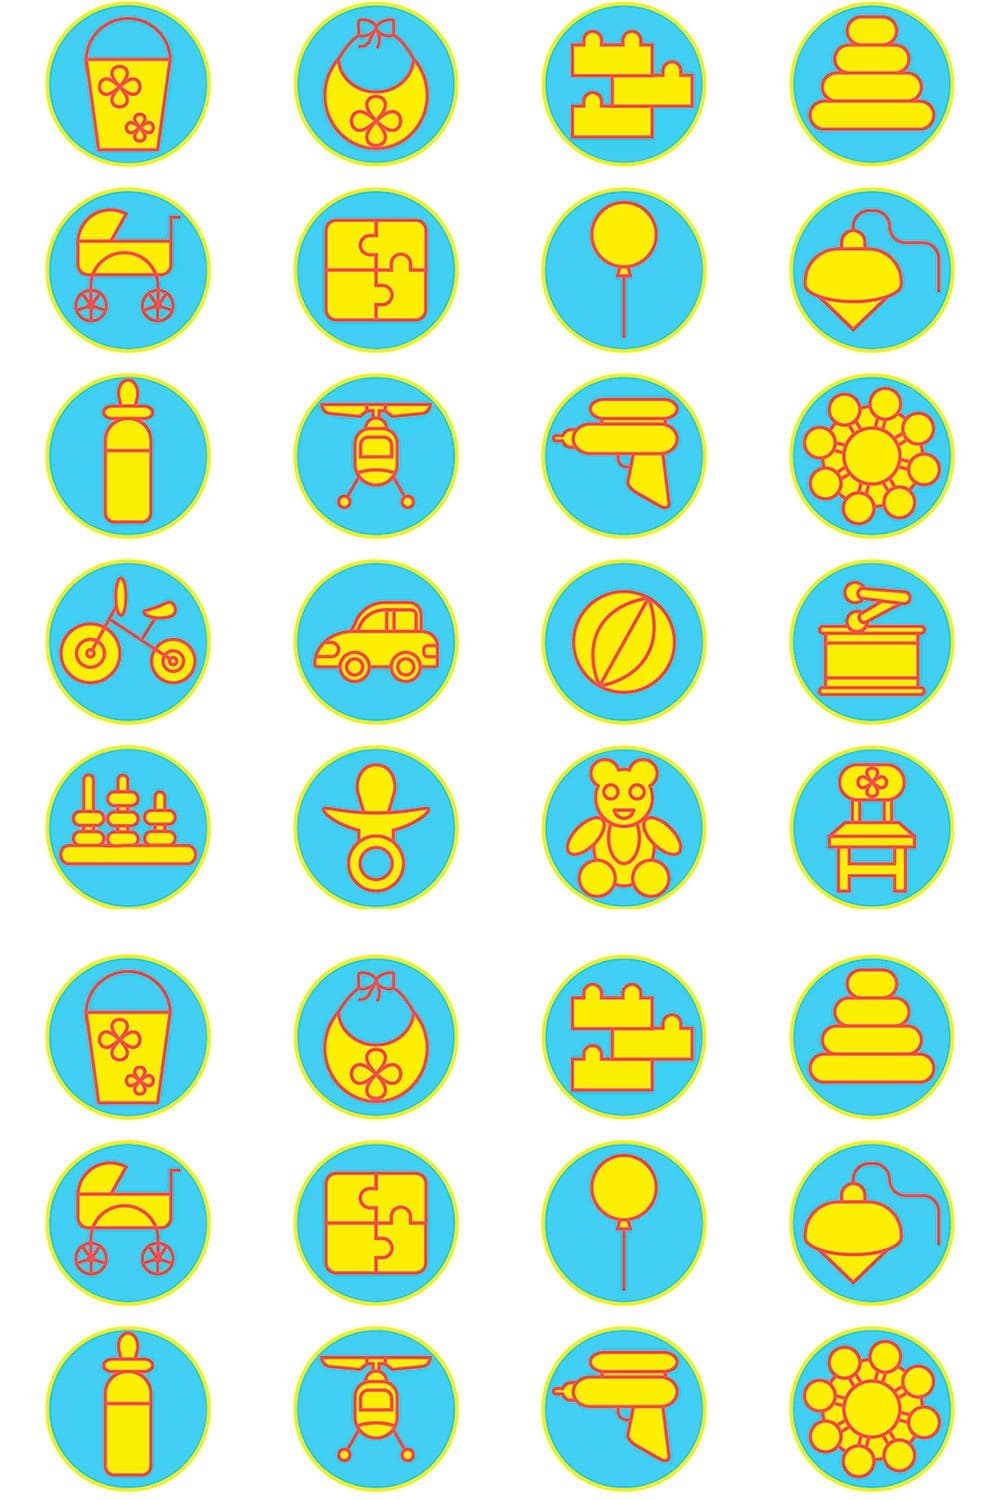 20 rounded babies icons set, picture for pinterest.